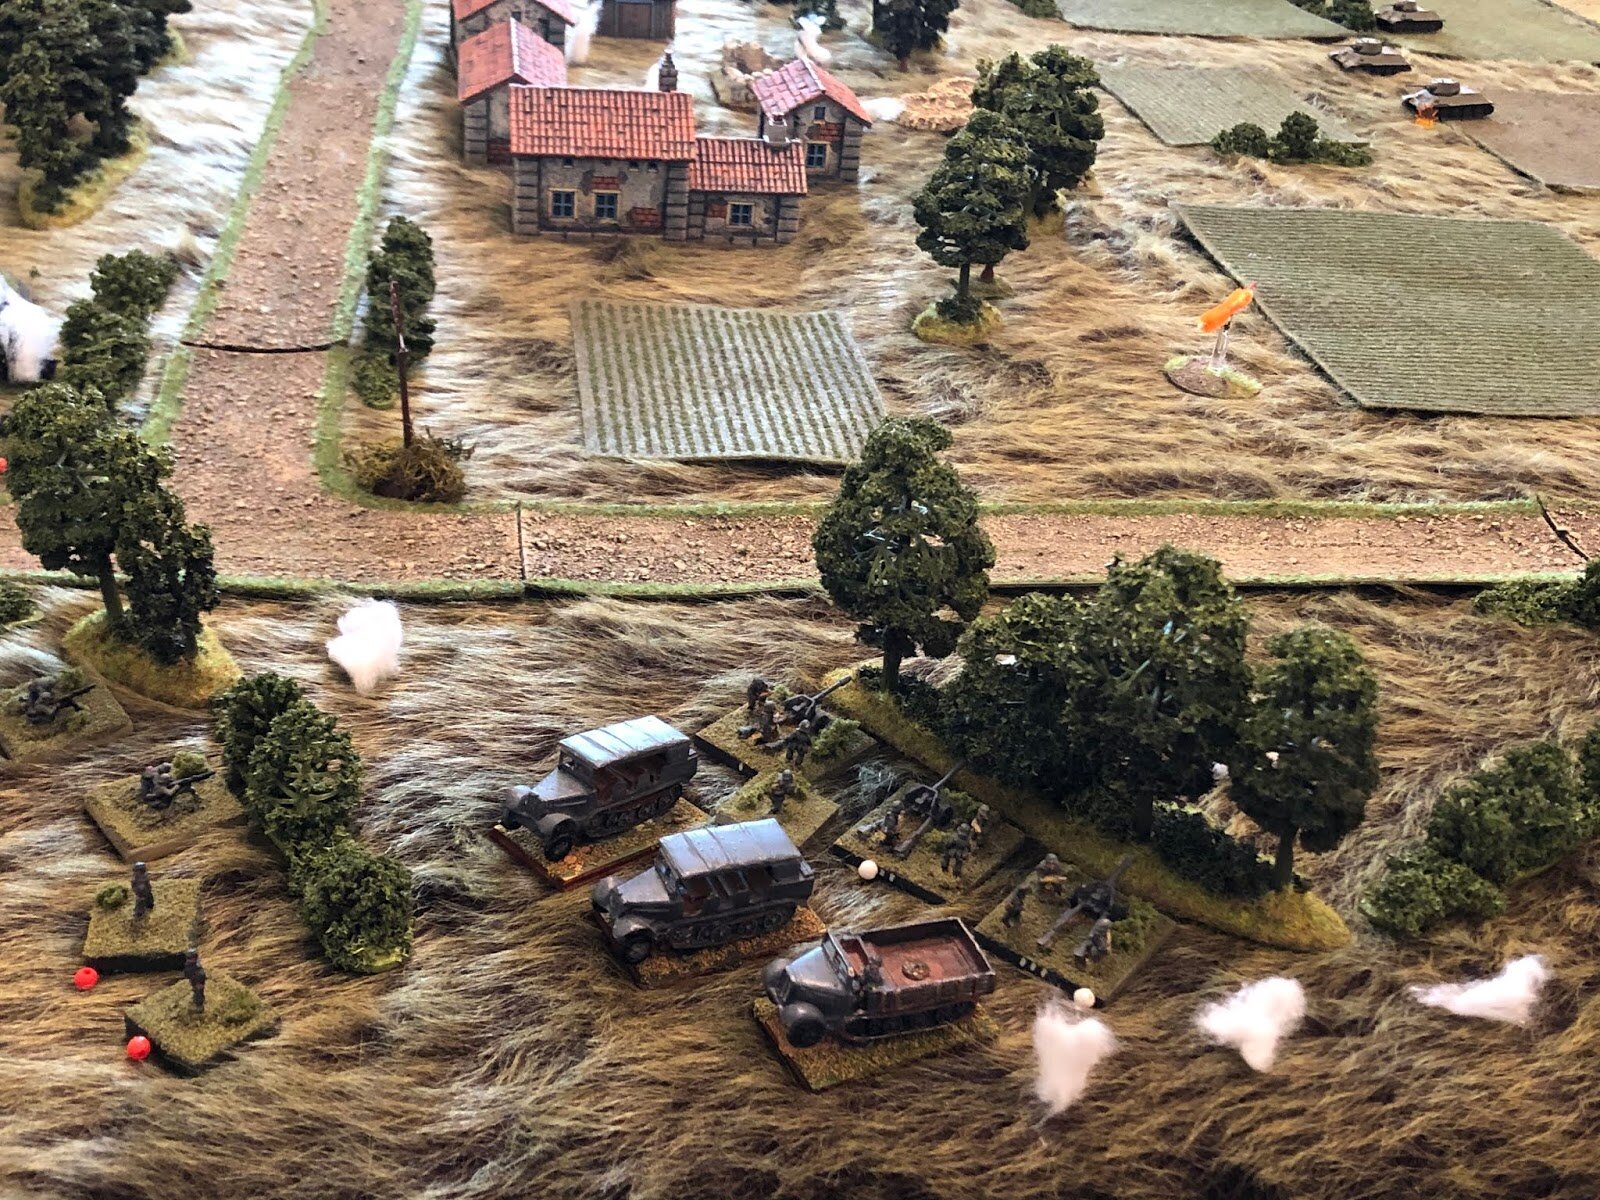  In the German ATG position, as much as he curses and cajoles, the Platoon Commander can't get the cowardly gun crews that ran to rally (bottom left), but Gun #1 hangs in there and keeps firing, sighting in on one of the T-34s from 1st Tank Platoon (